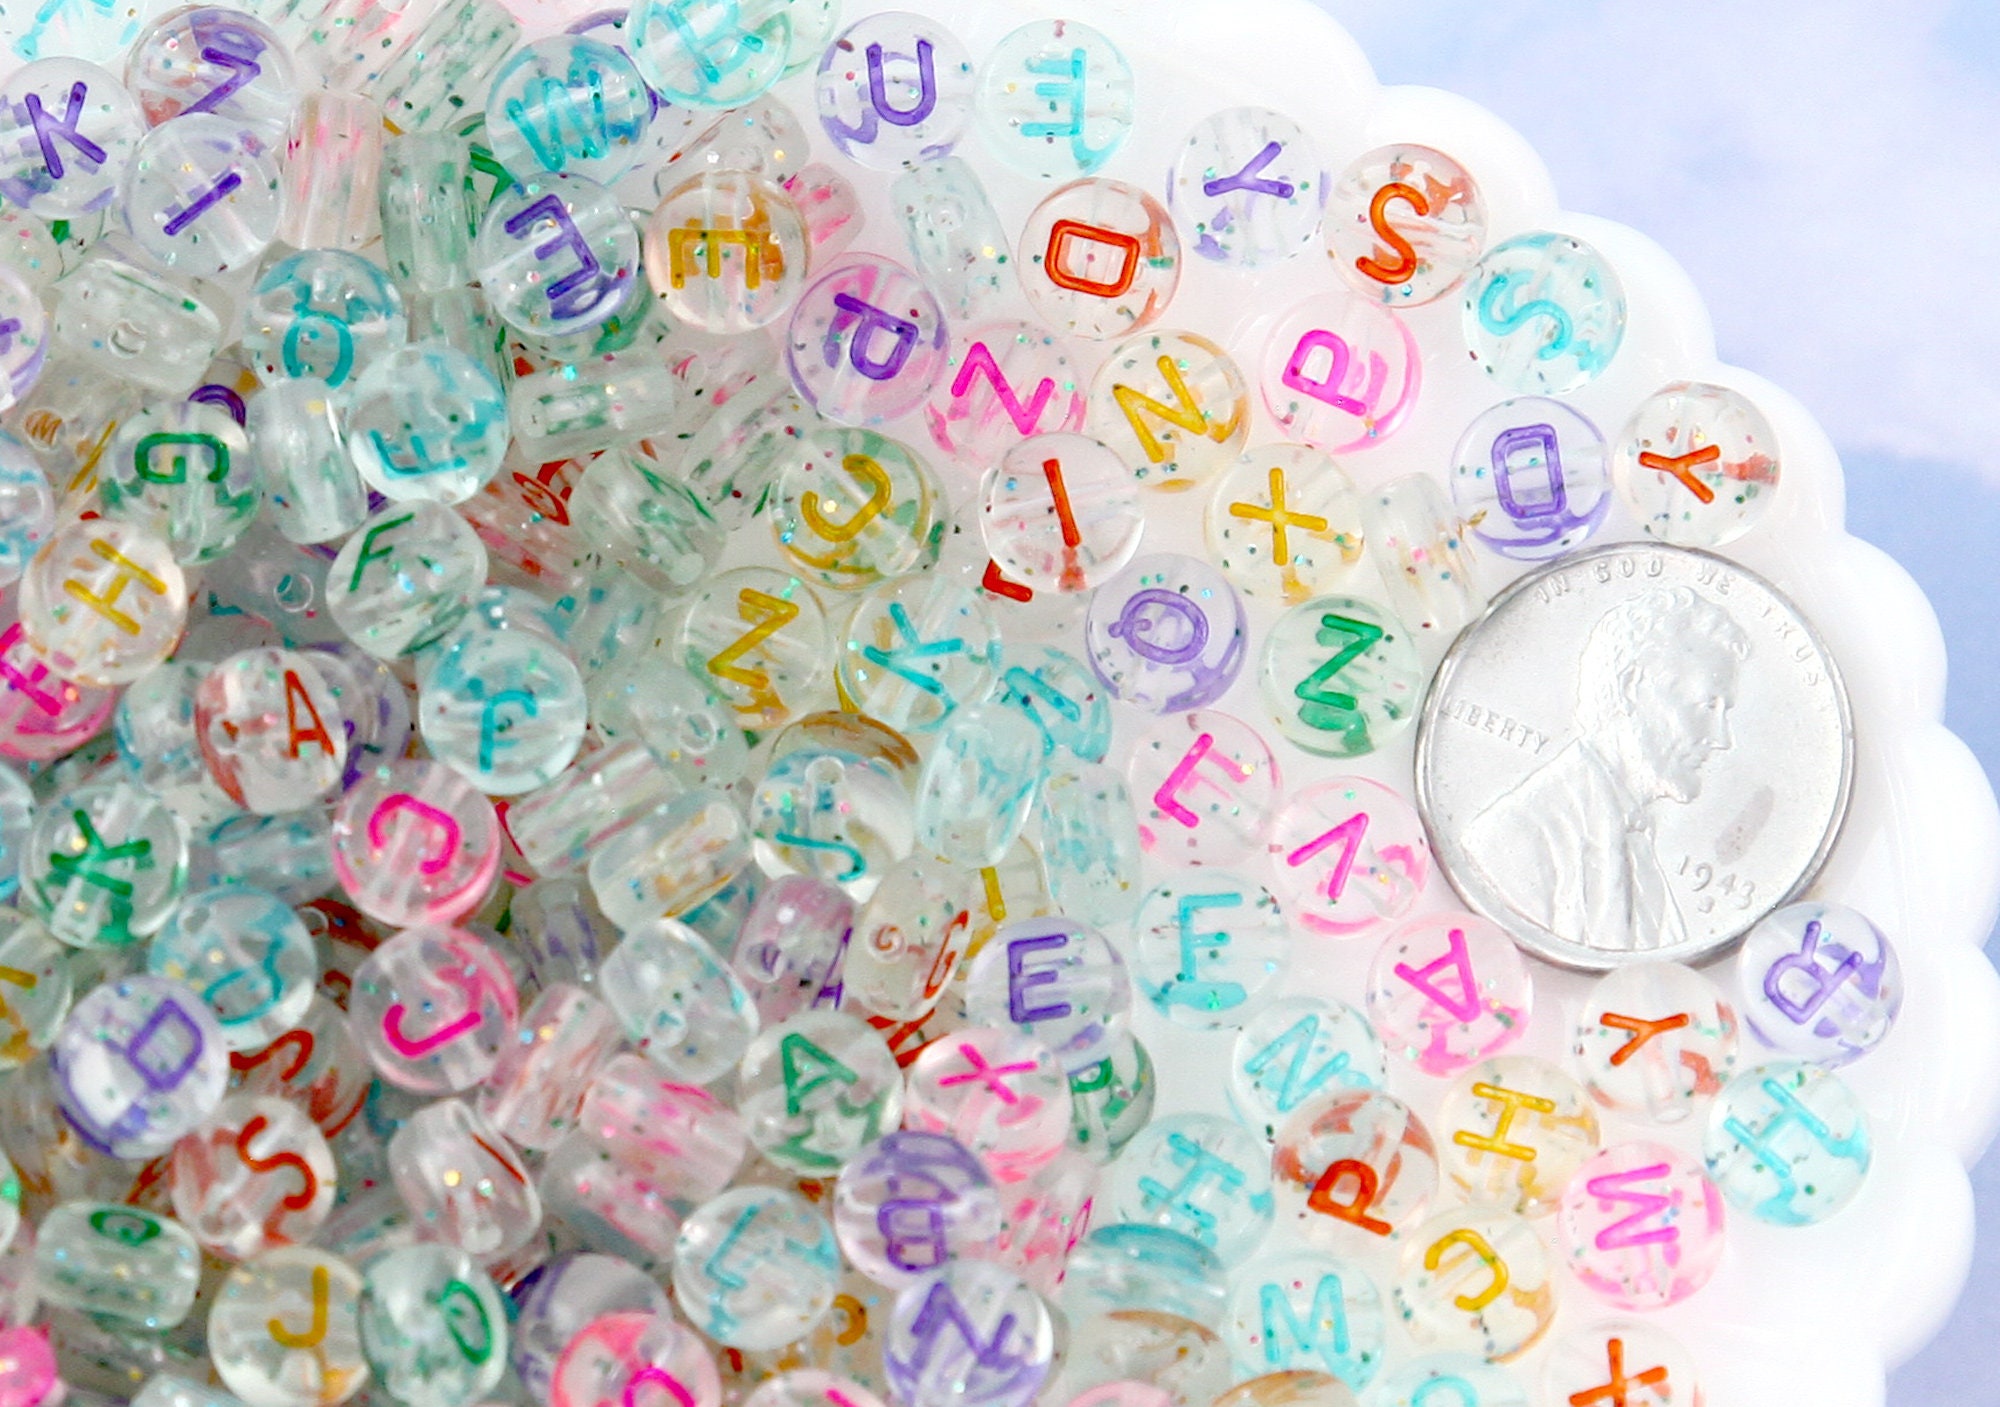 Letter Beads - 7mm White Bead with Pink Text Round Alphabet Acrylic or  Resin Beads - 400 pc set